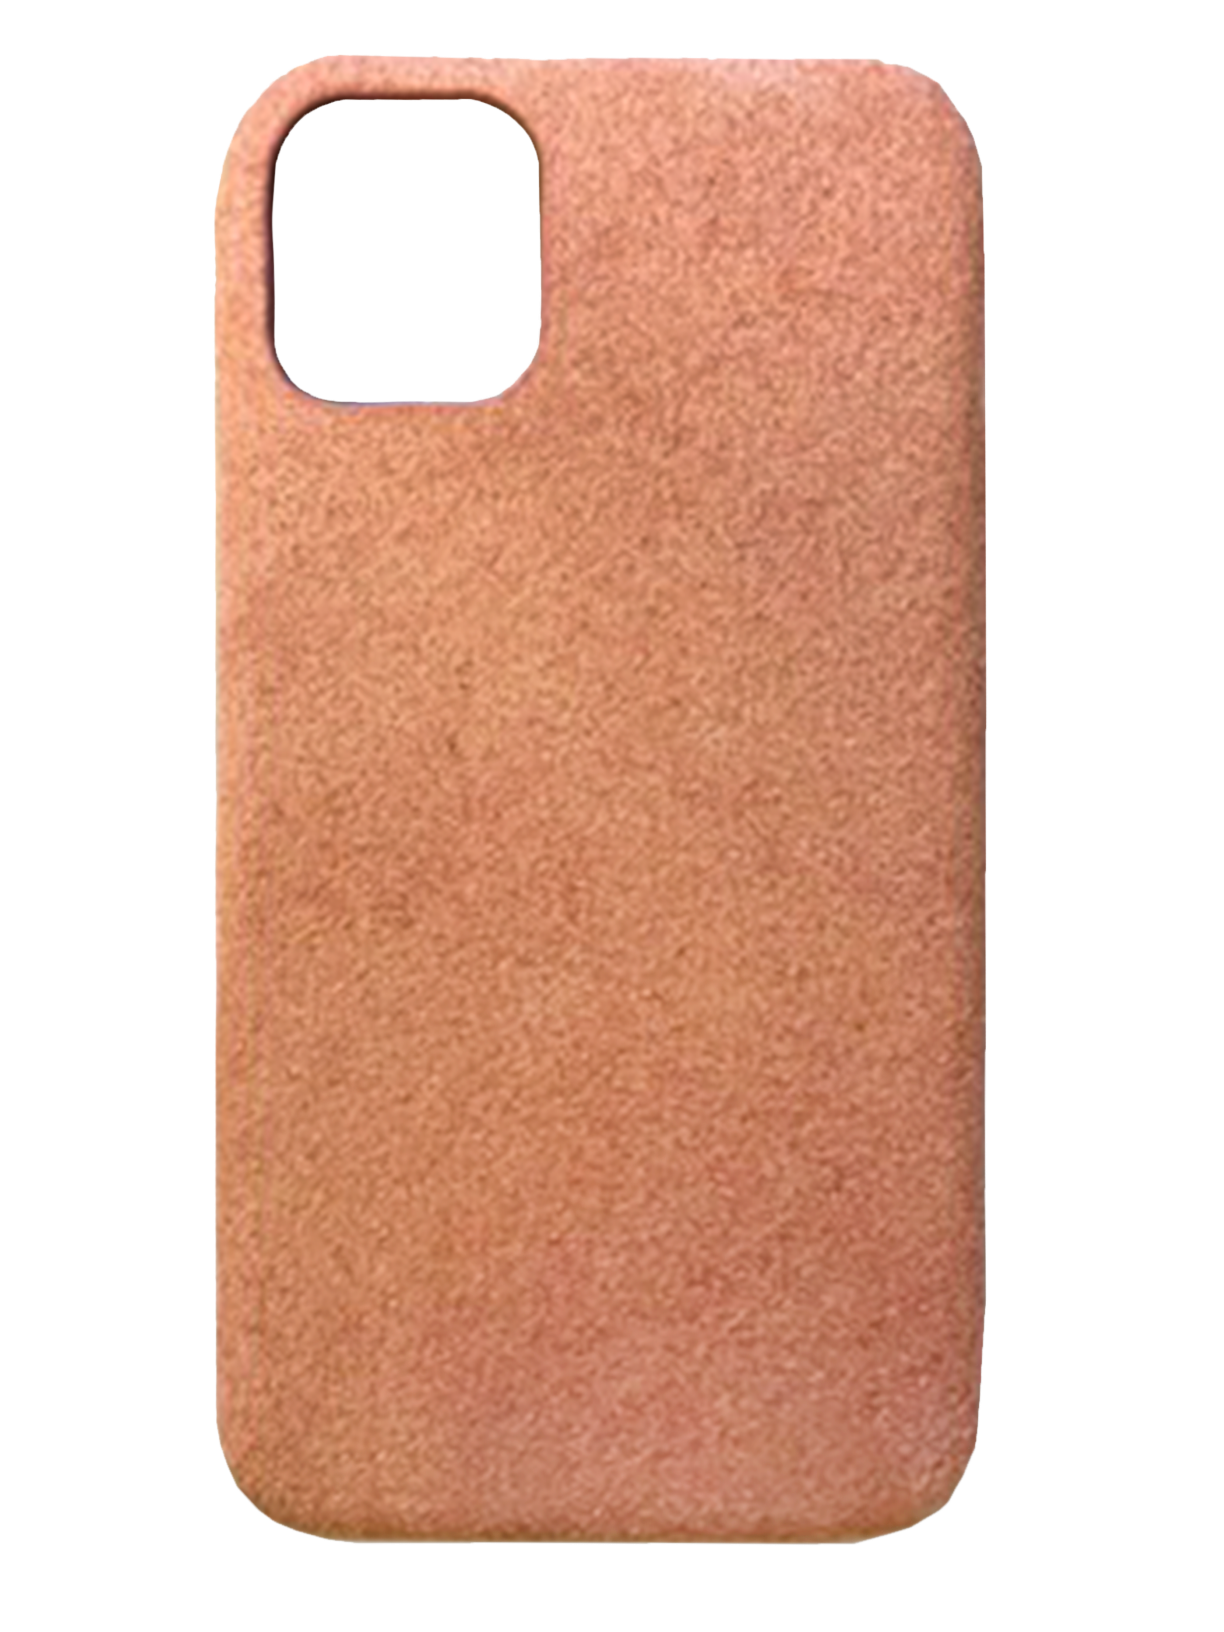 Soft Pink Suede effect - iPhone XR / iPhone 11